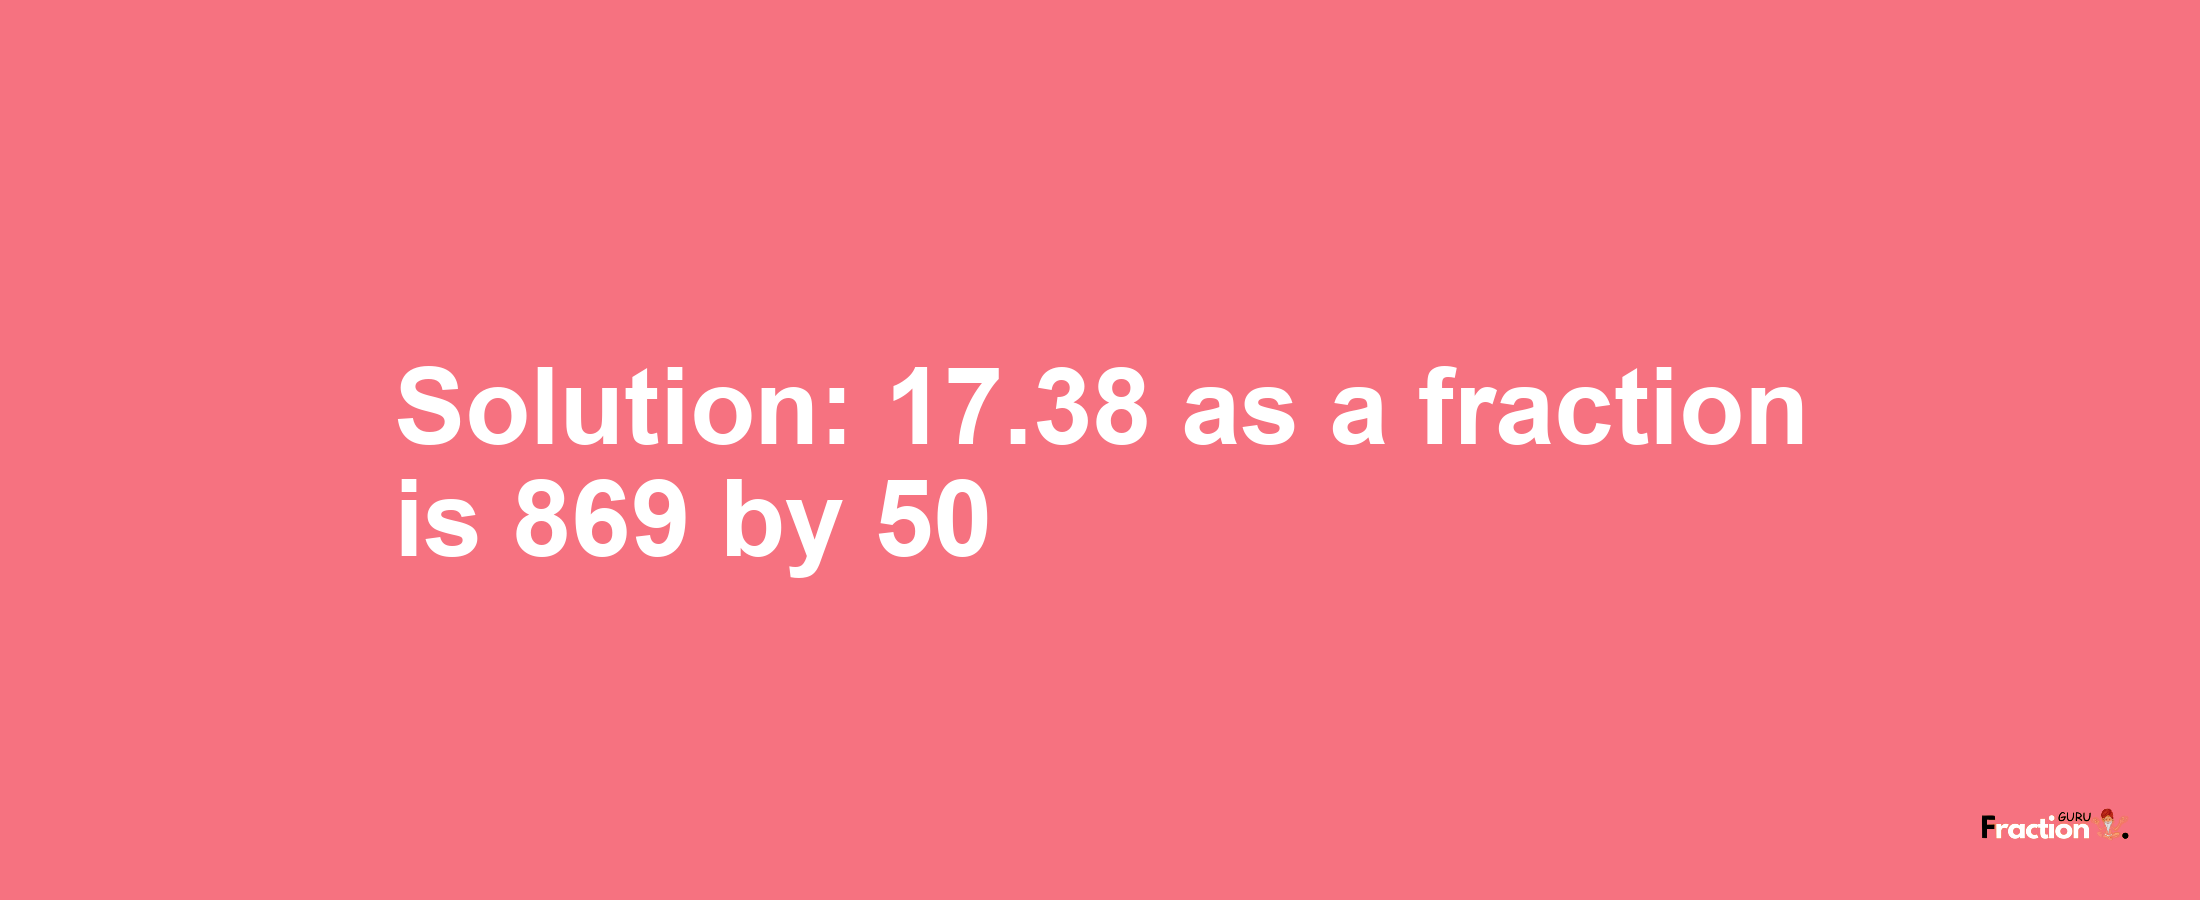 Solution:17.38 as a fraction is 869/50